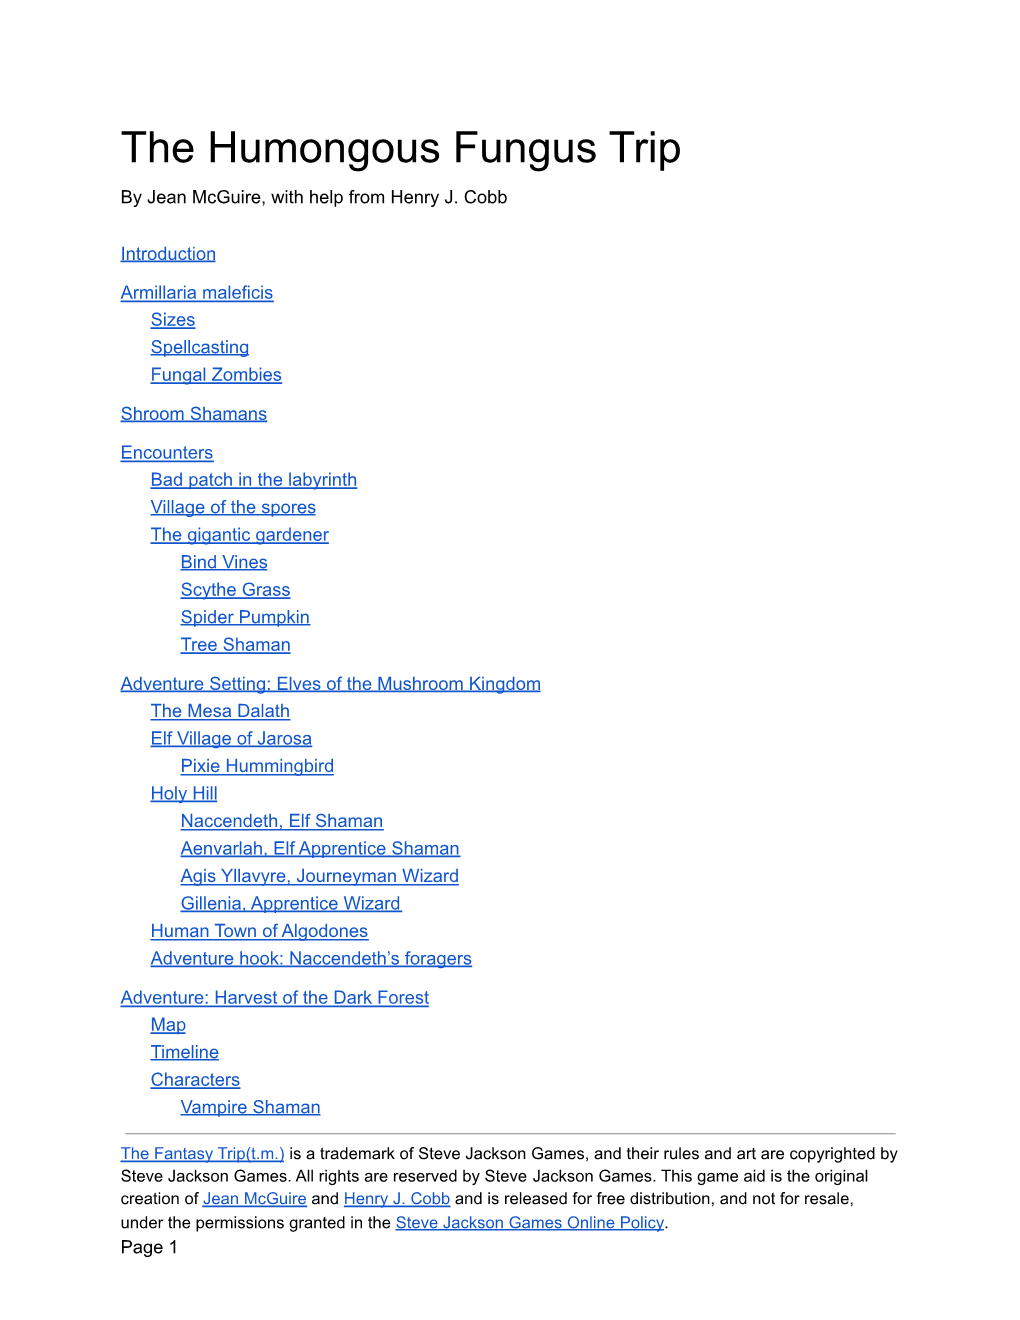 The Humongous Fungus Trip by Jean Mcguire, with Help from Henry J